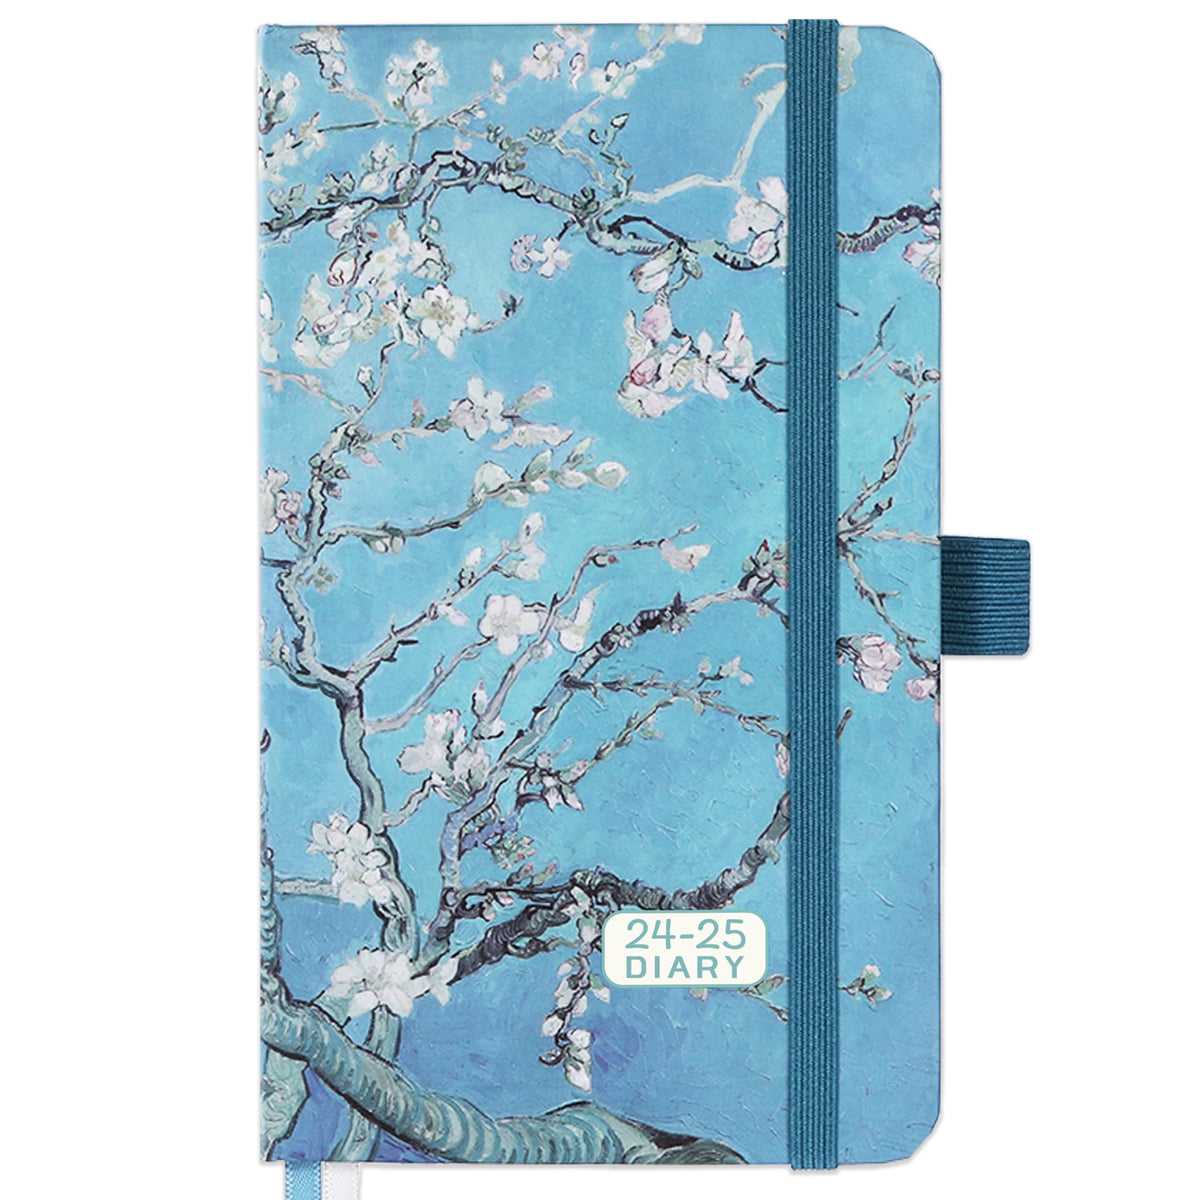 Pocket Diary 2024-2025 - A6 Academic Diary 2024-2025 from Aug. 2024 to Jul. 2025, A6 Week to View Diary 2024-2025 with Pen Loop, 16×10×1.5 cm